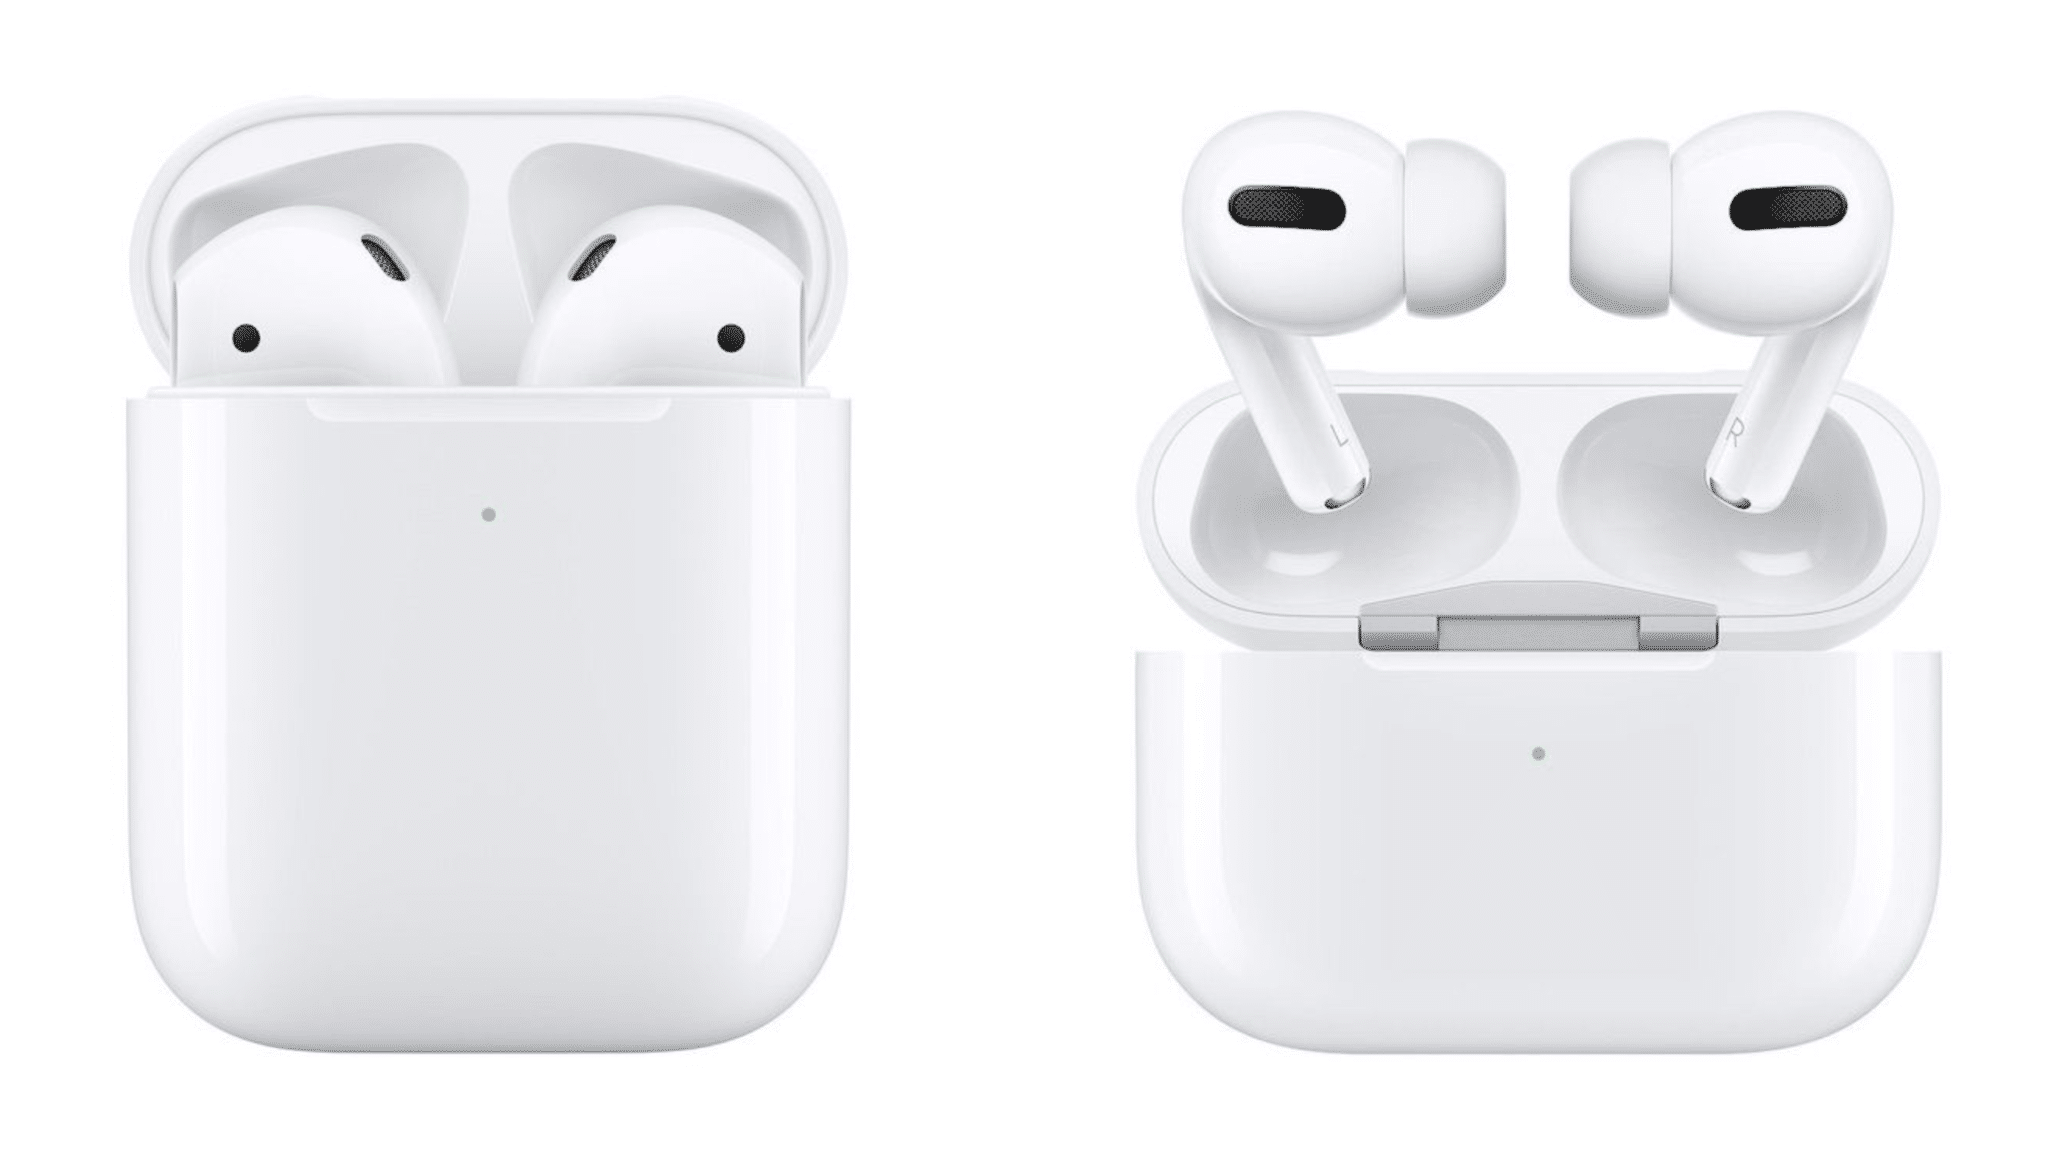 Airpods pro шипят